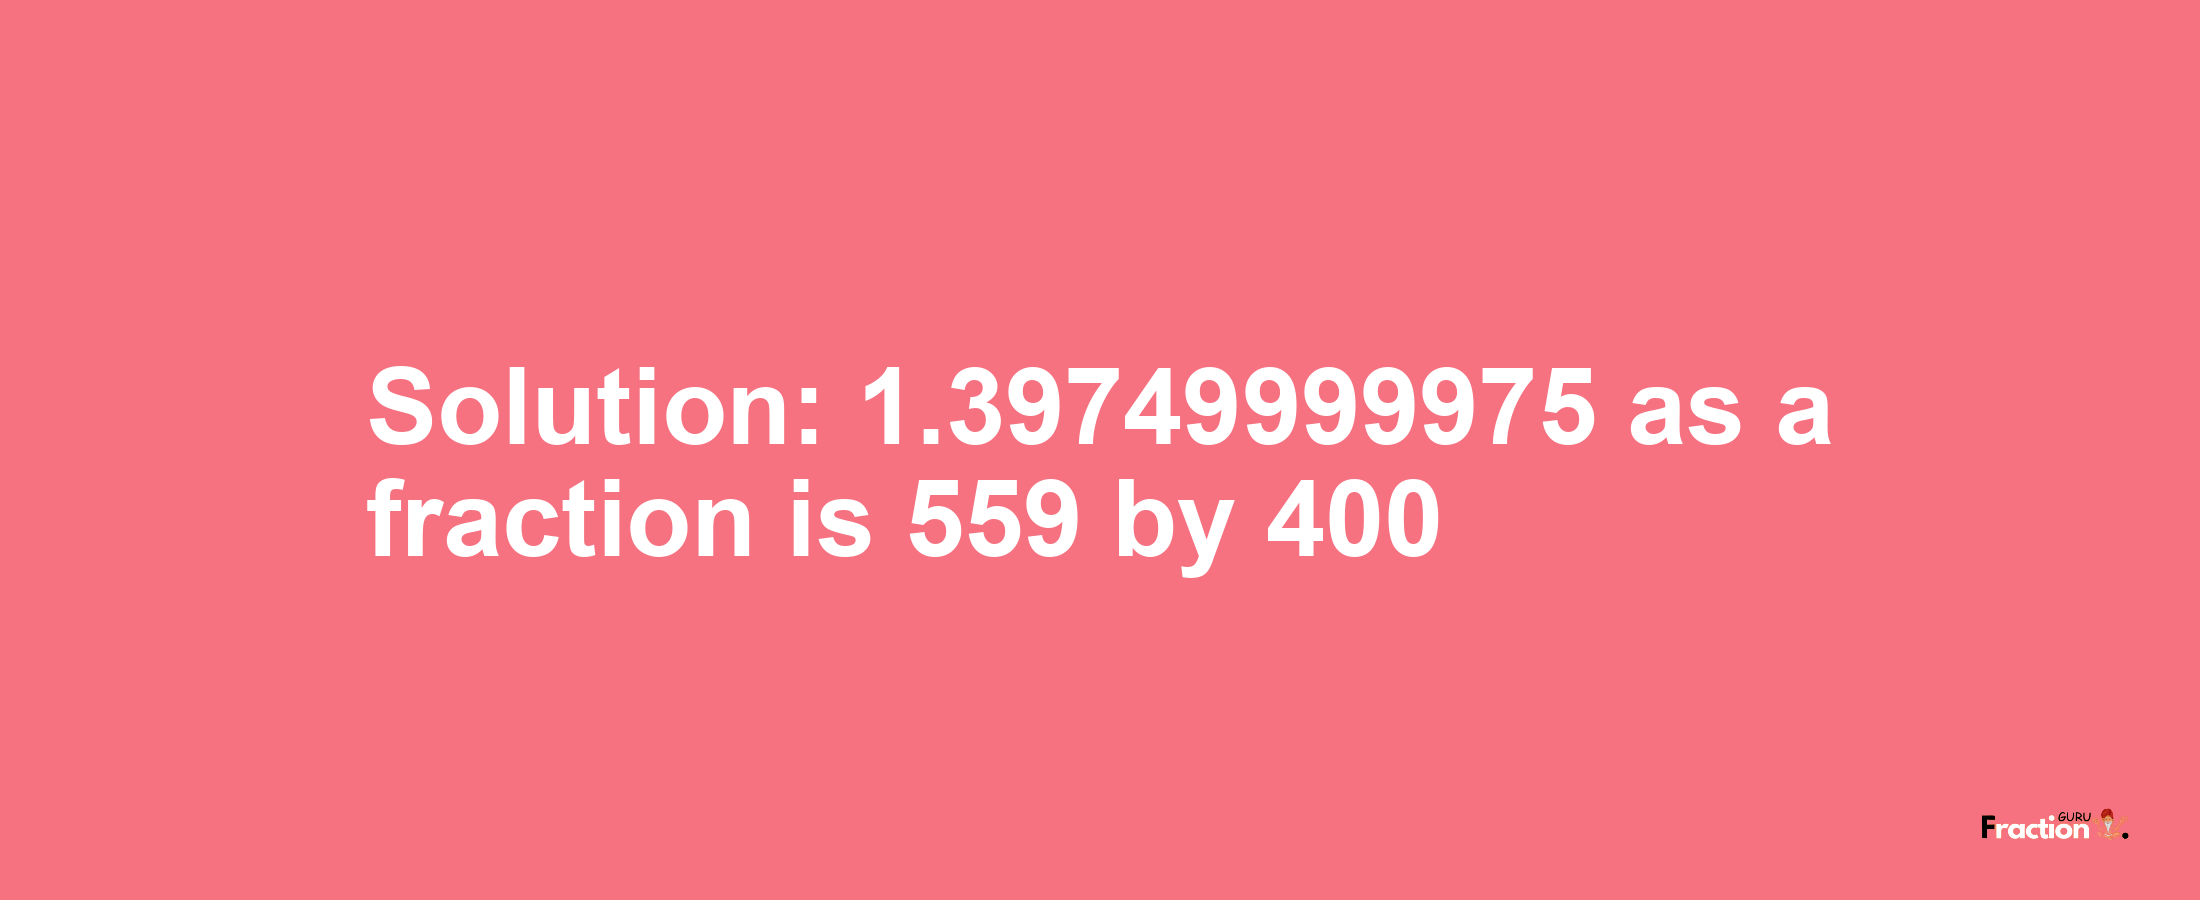 Solution:1.39749999975 as a fraction is 559/400